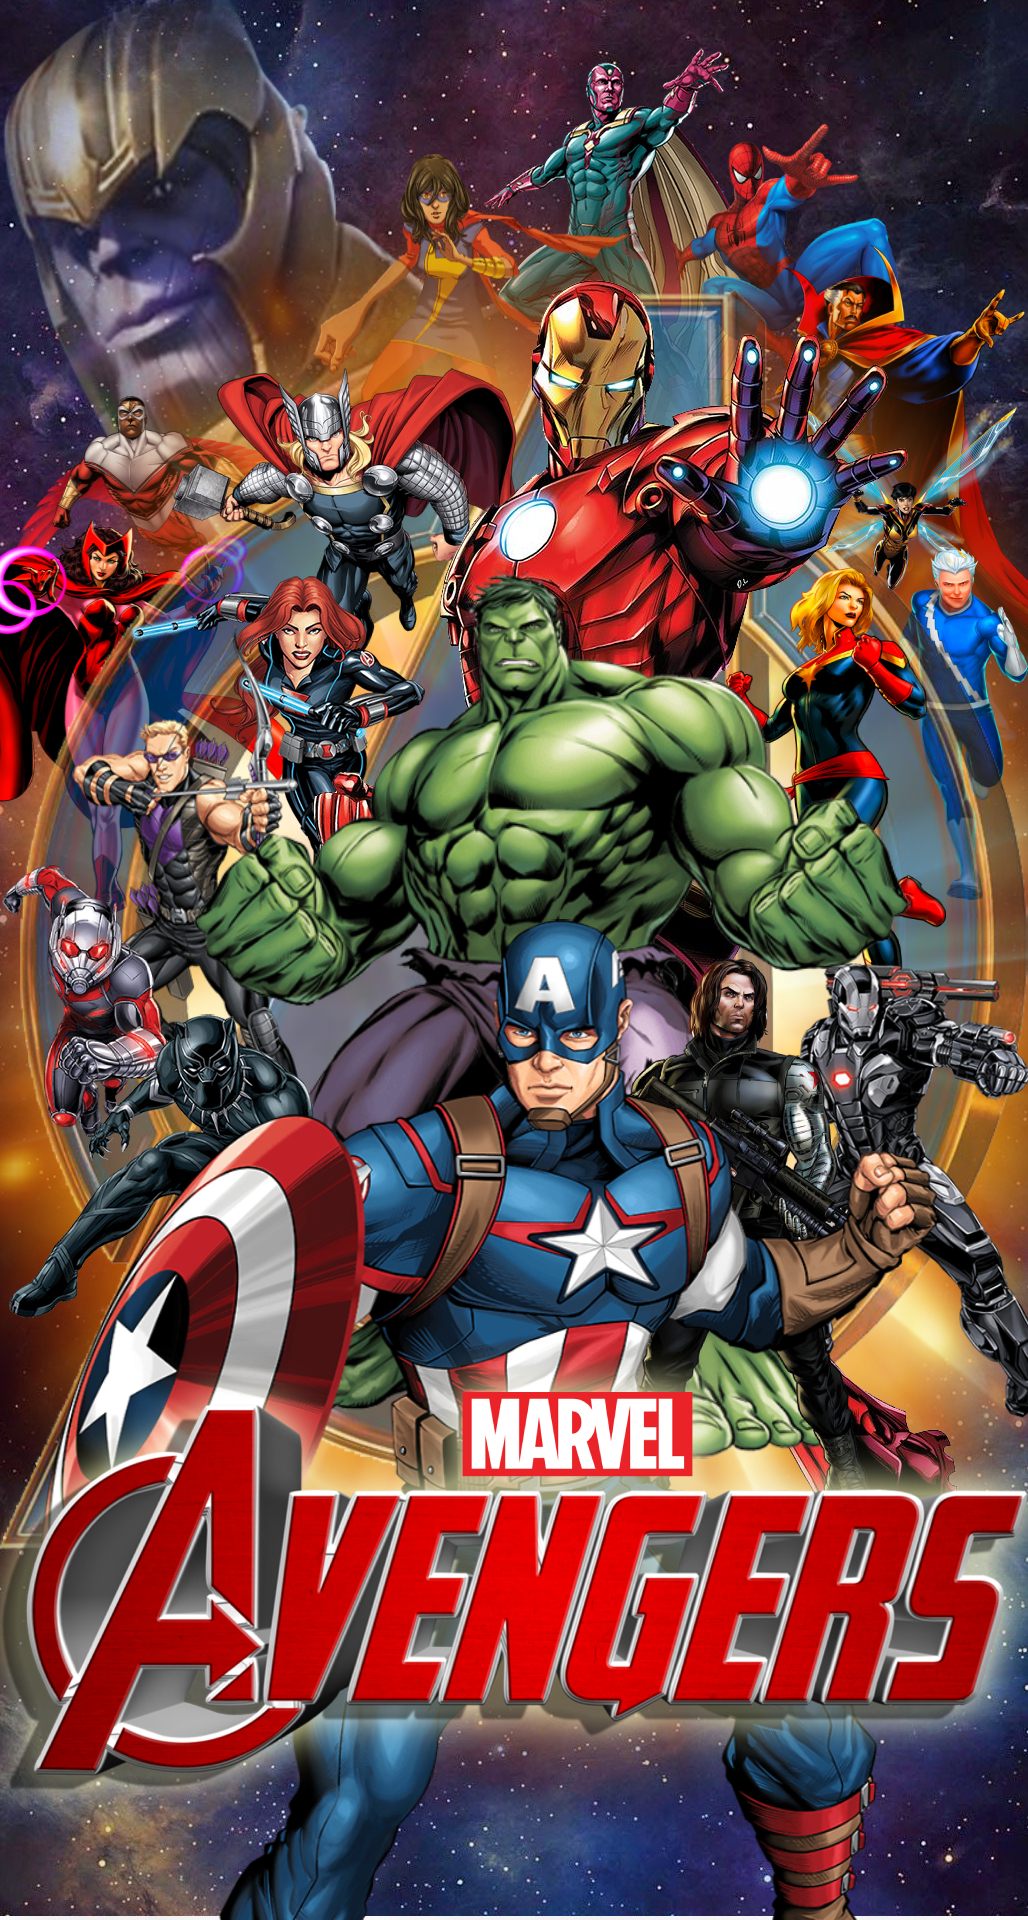 NEWEST MARVEL AVENGERS ASSEMBLE IPHONE WALLPAPER by